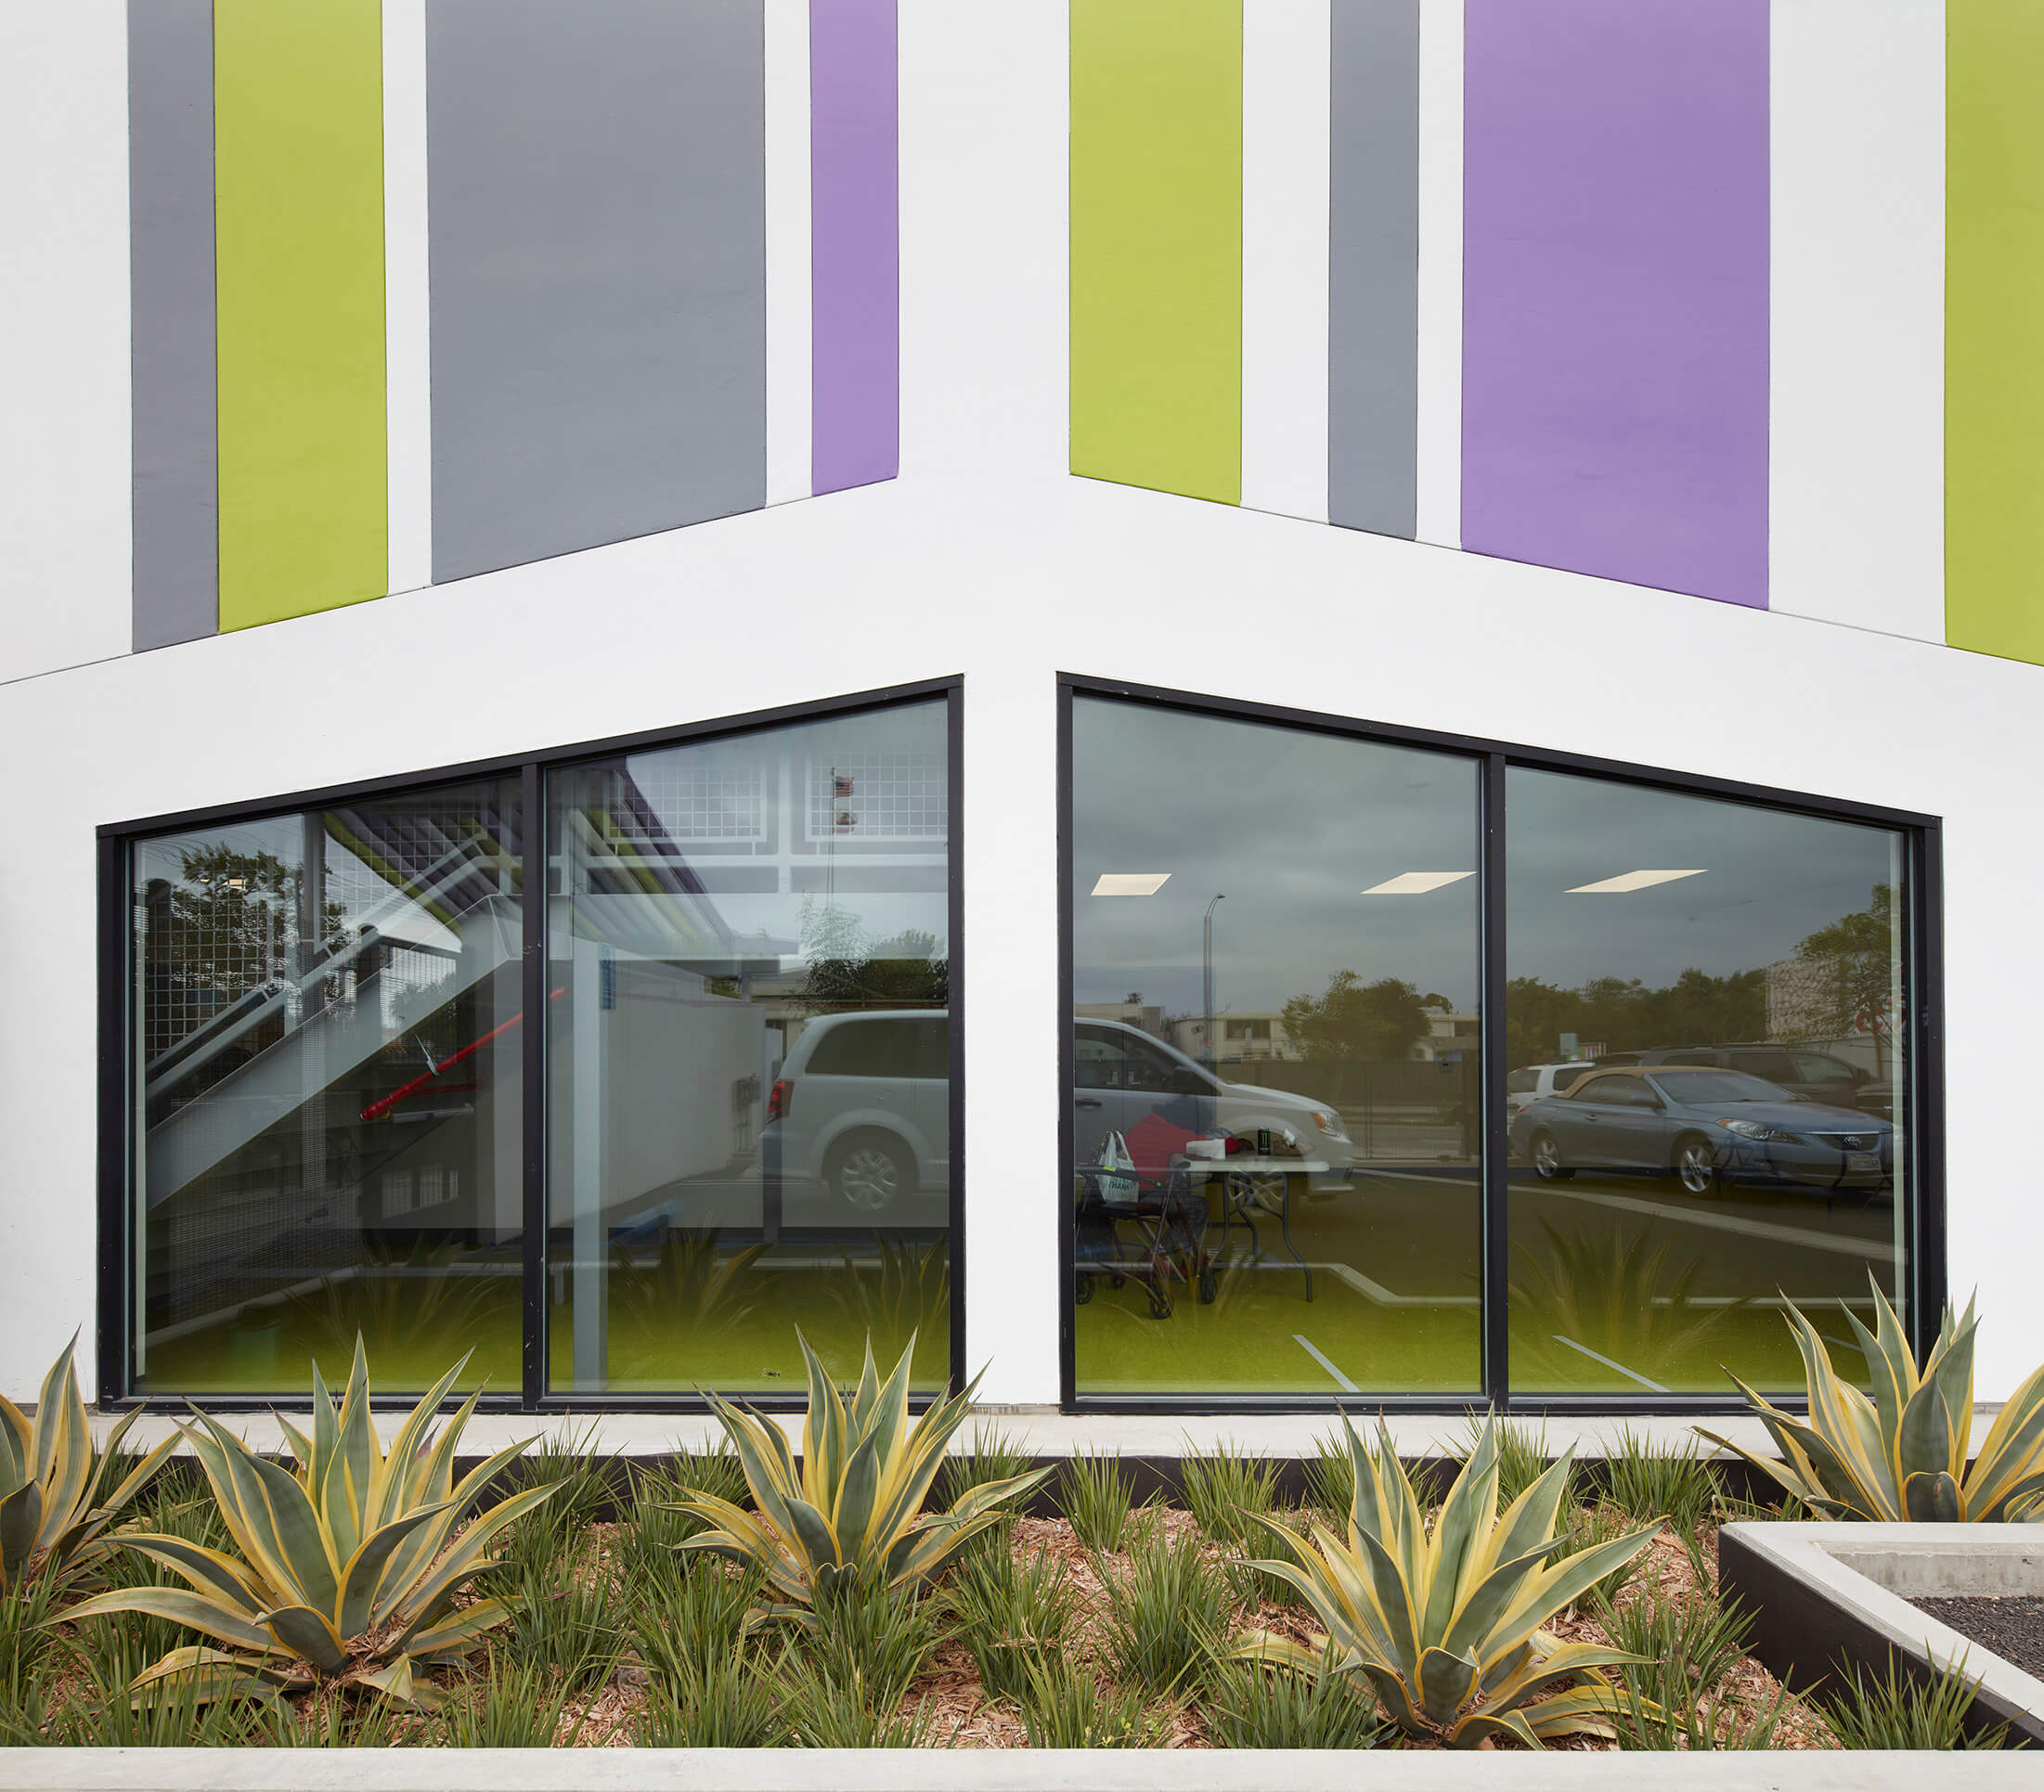 colorful facade of a supportive housing community in los angeles